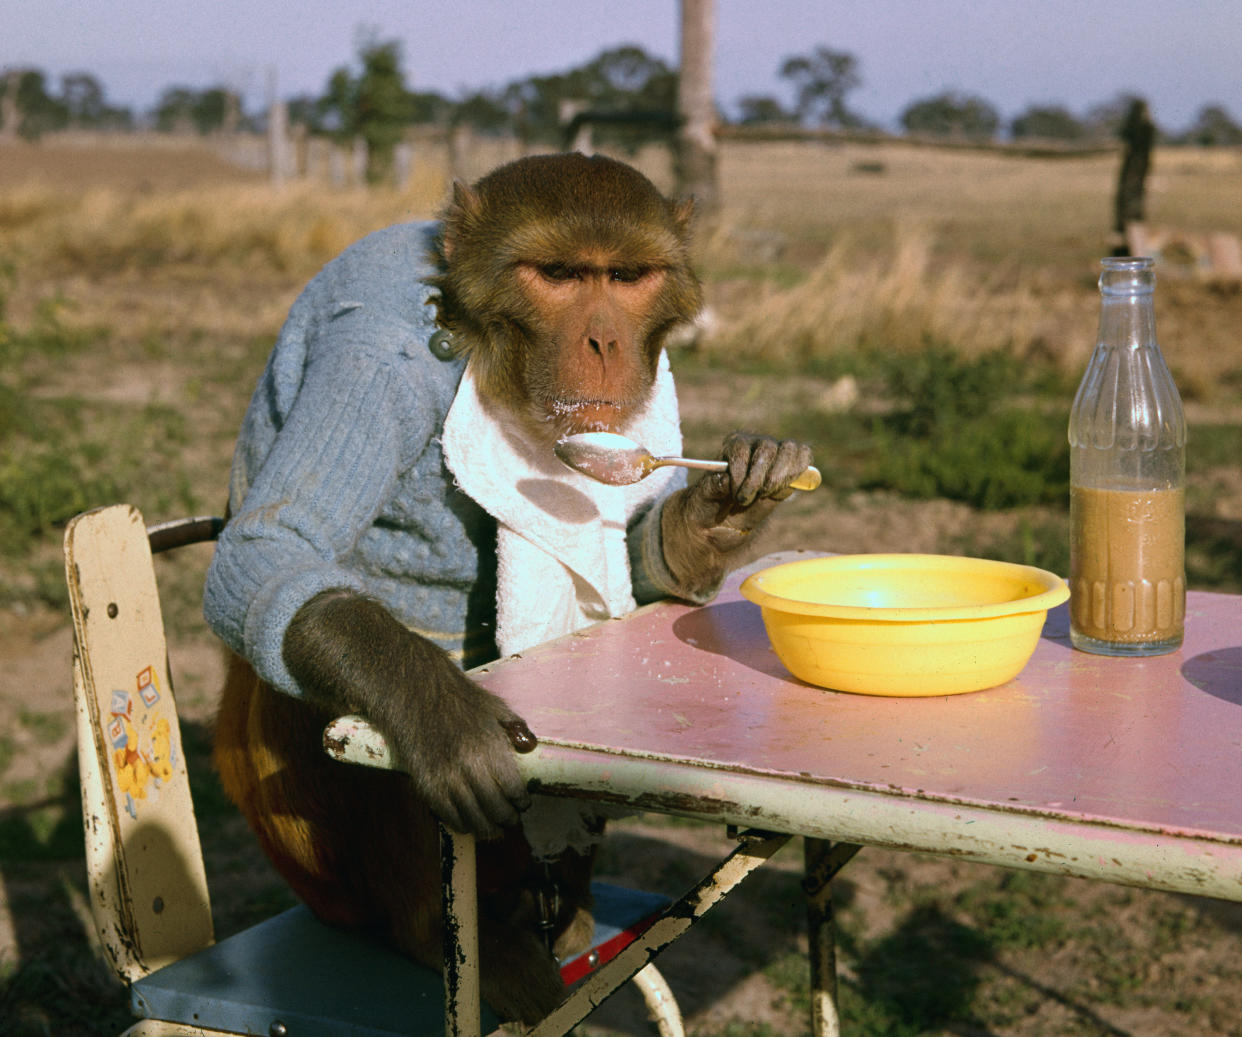 https://www.gettyimages.co.uk/detail/news-photo/australia-johnny-rhesus-tractor-druving-monkey-lunches-with-news-photo/515492606